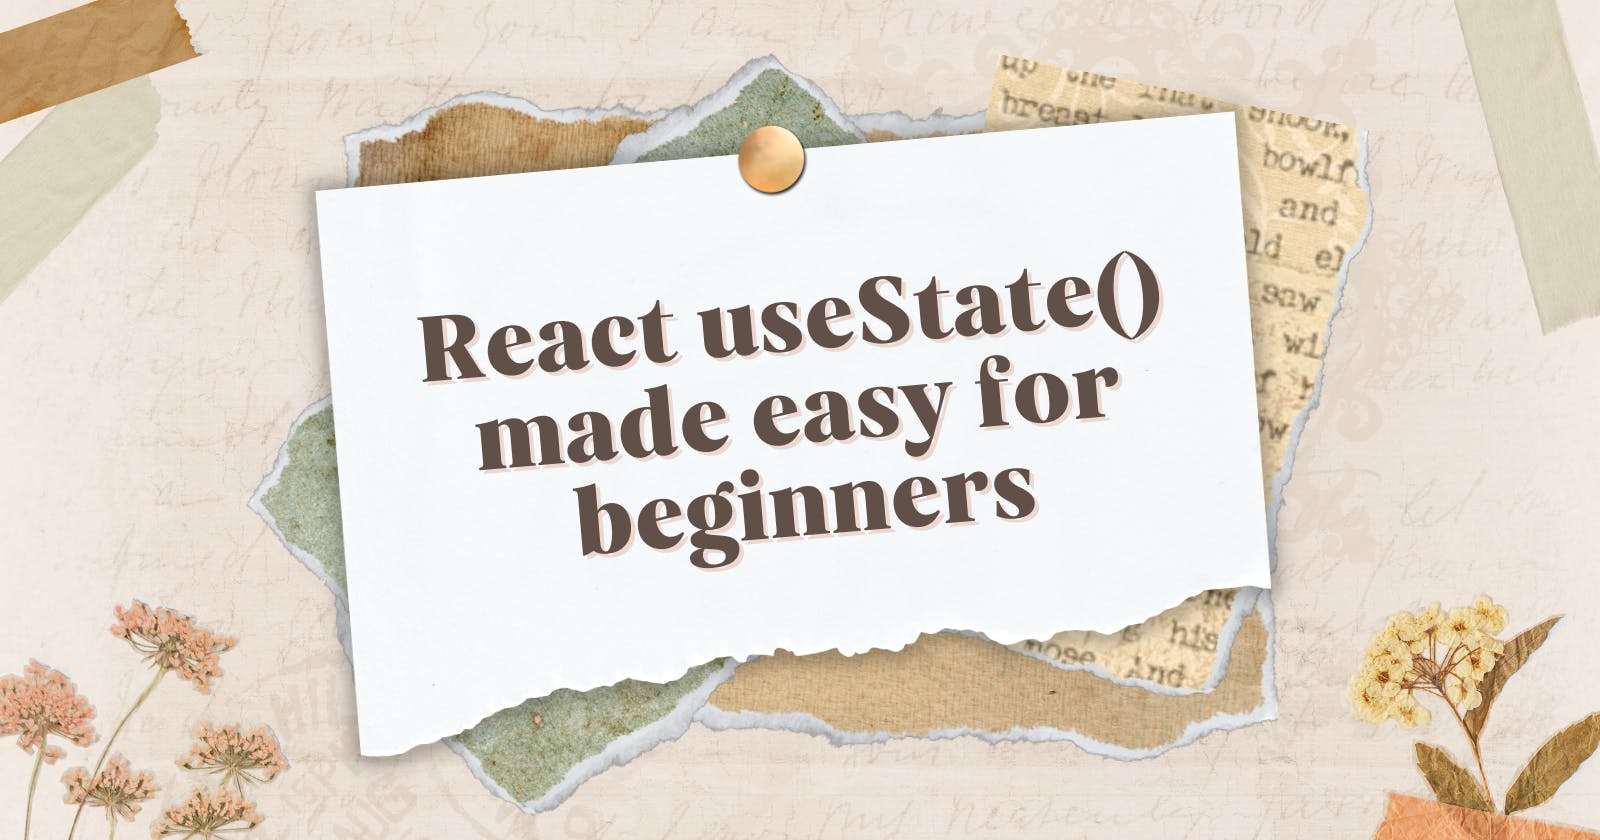 React useState() made easy for beginners